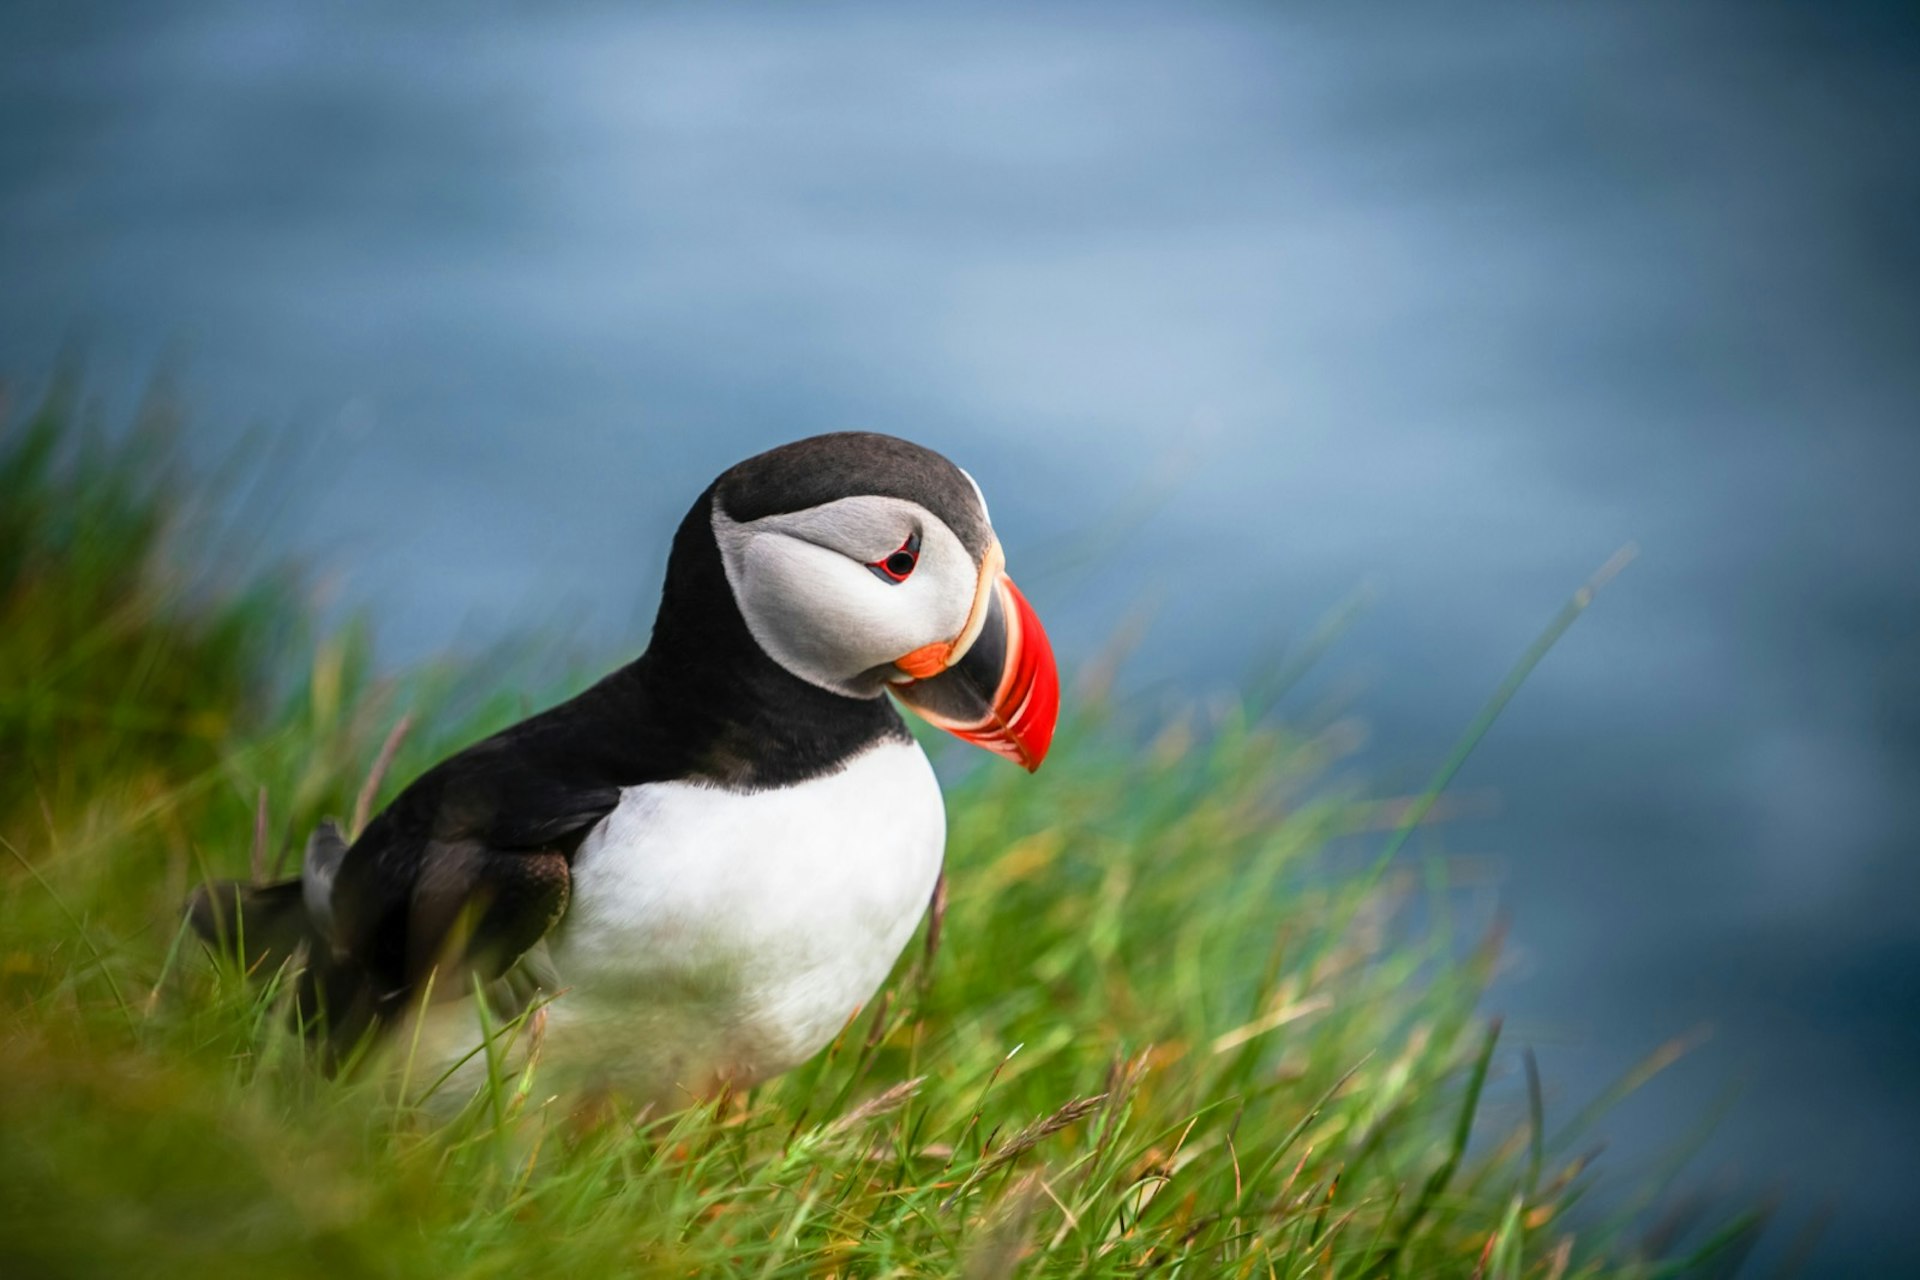 With a black and white body and a large orange and yellow beak, the puffin seen on a Newfoundland sea cliff is one of the strangest looking birds 